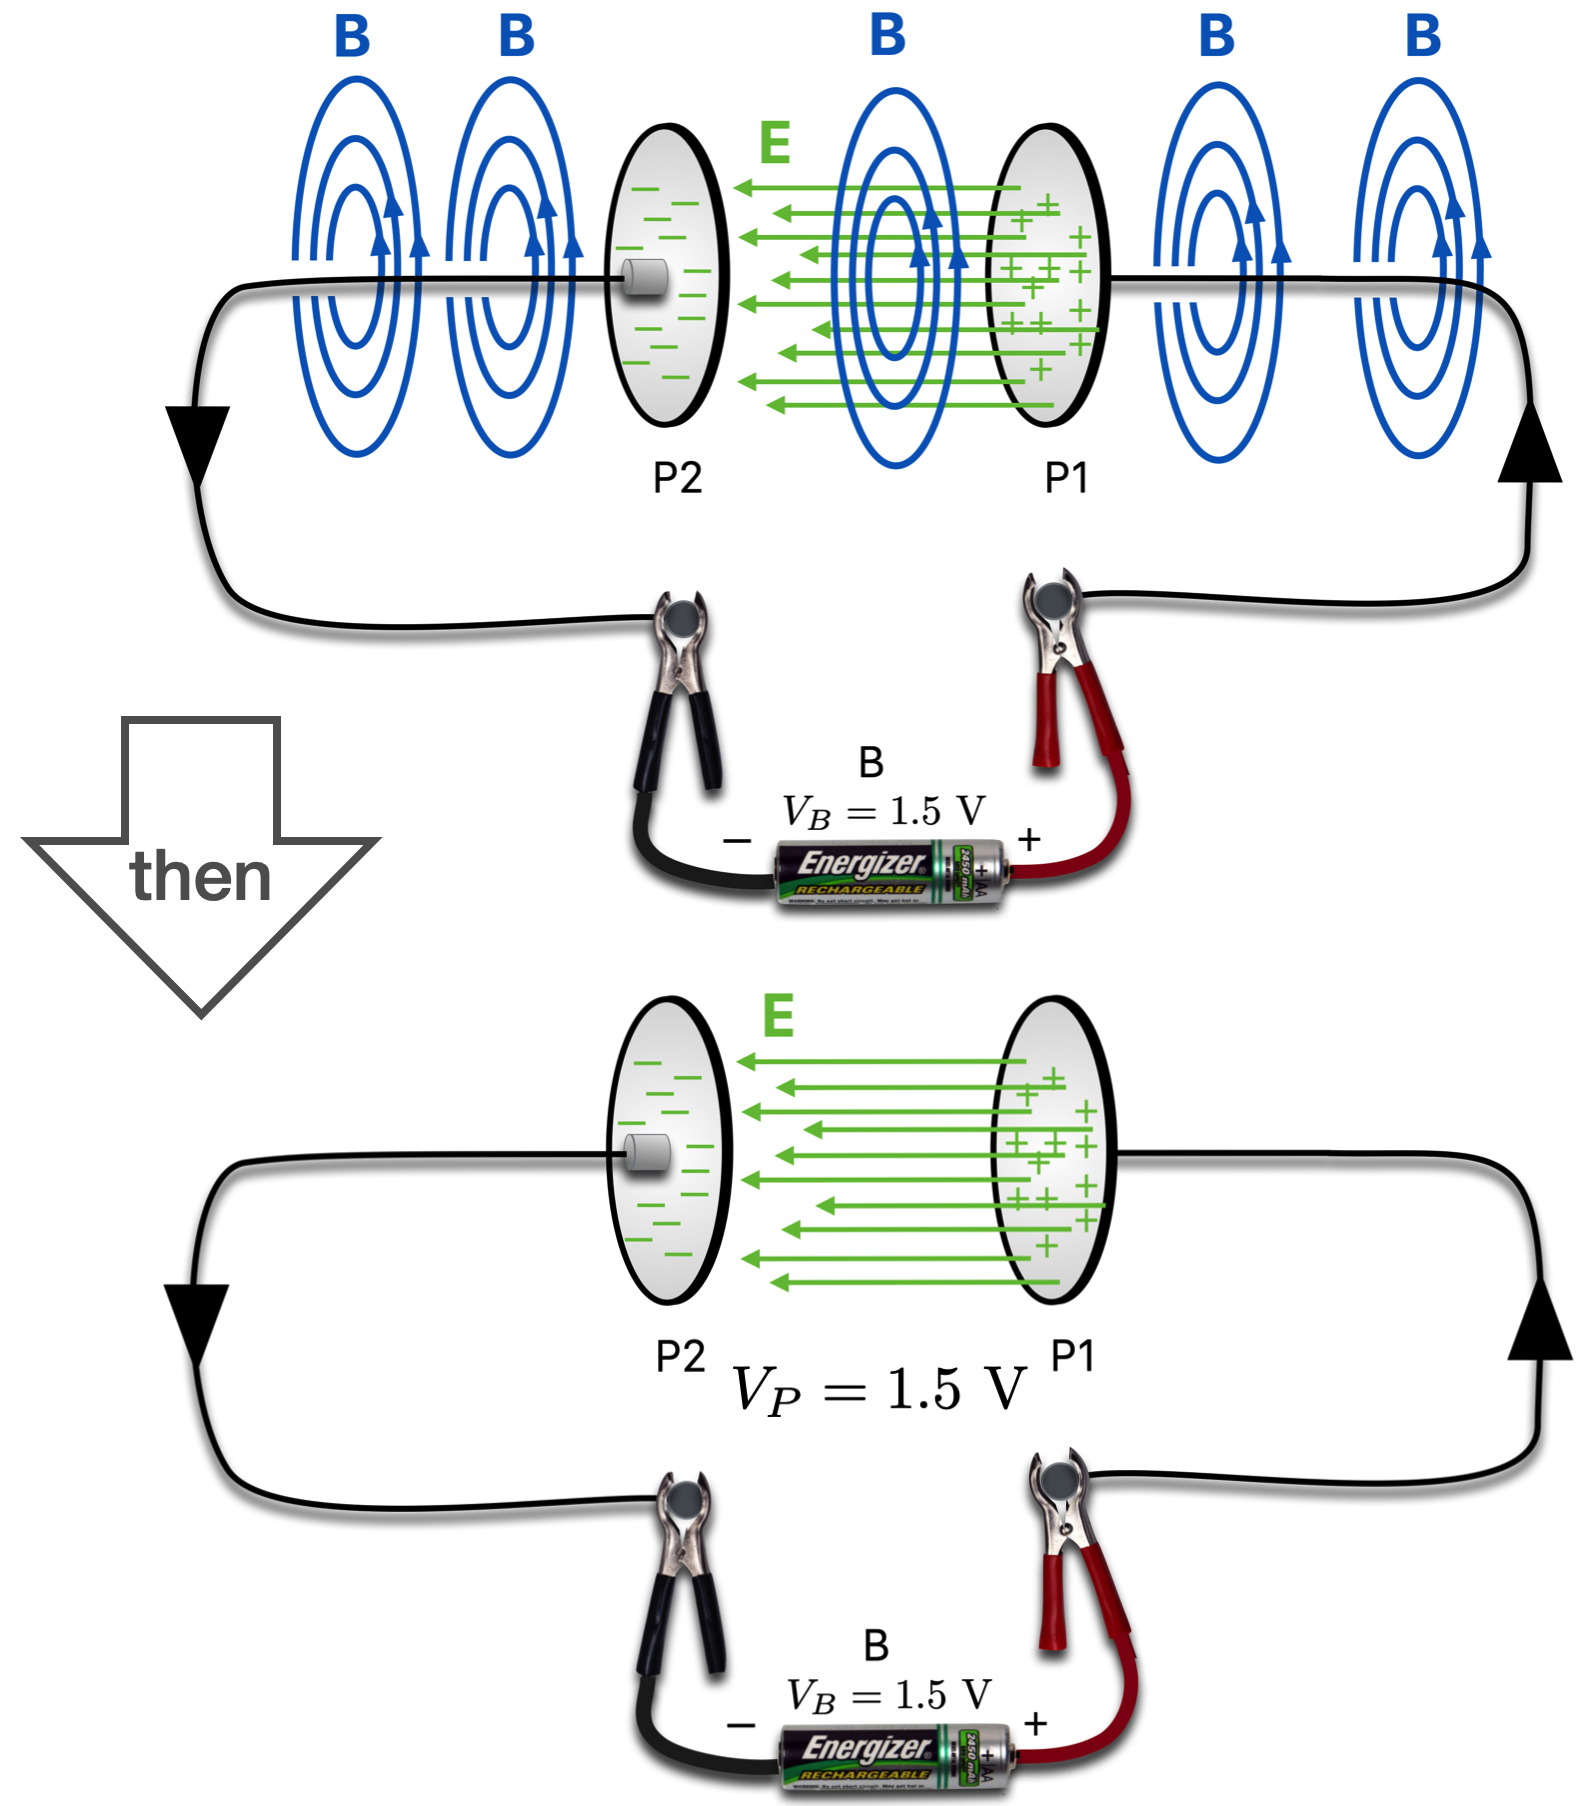 But the discontinuity of the magnetic field is bothersome and Maxwell's model responded. There is a magnetic field between the plates also as suggested in the top. Eventually the charge deposited on the plates leads to a voltage across the plates that's equal to the battery voltage. When that happens, the current stops flowing: the magnetic field disappears and the electric field remains.